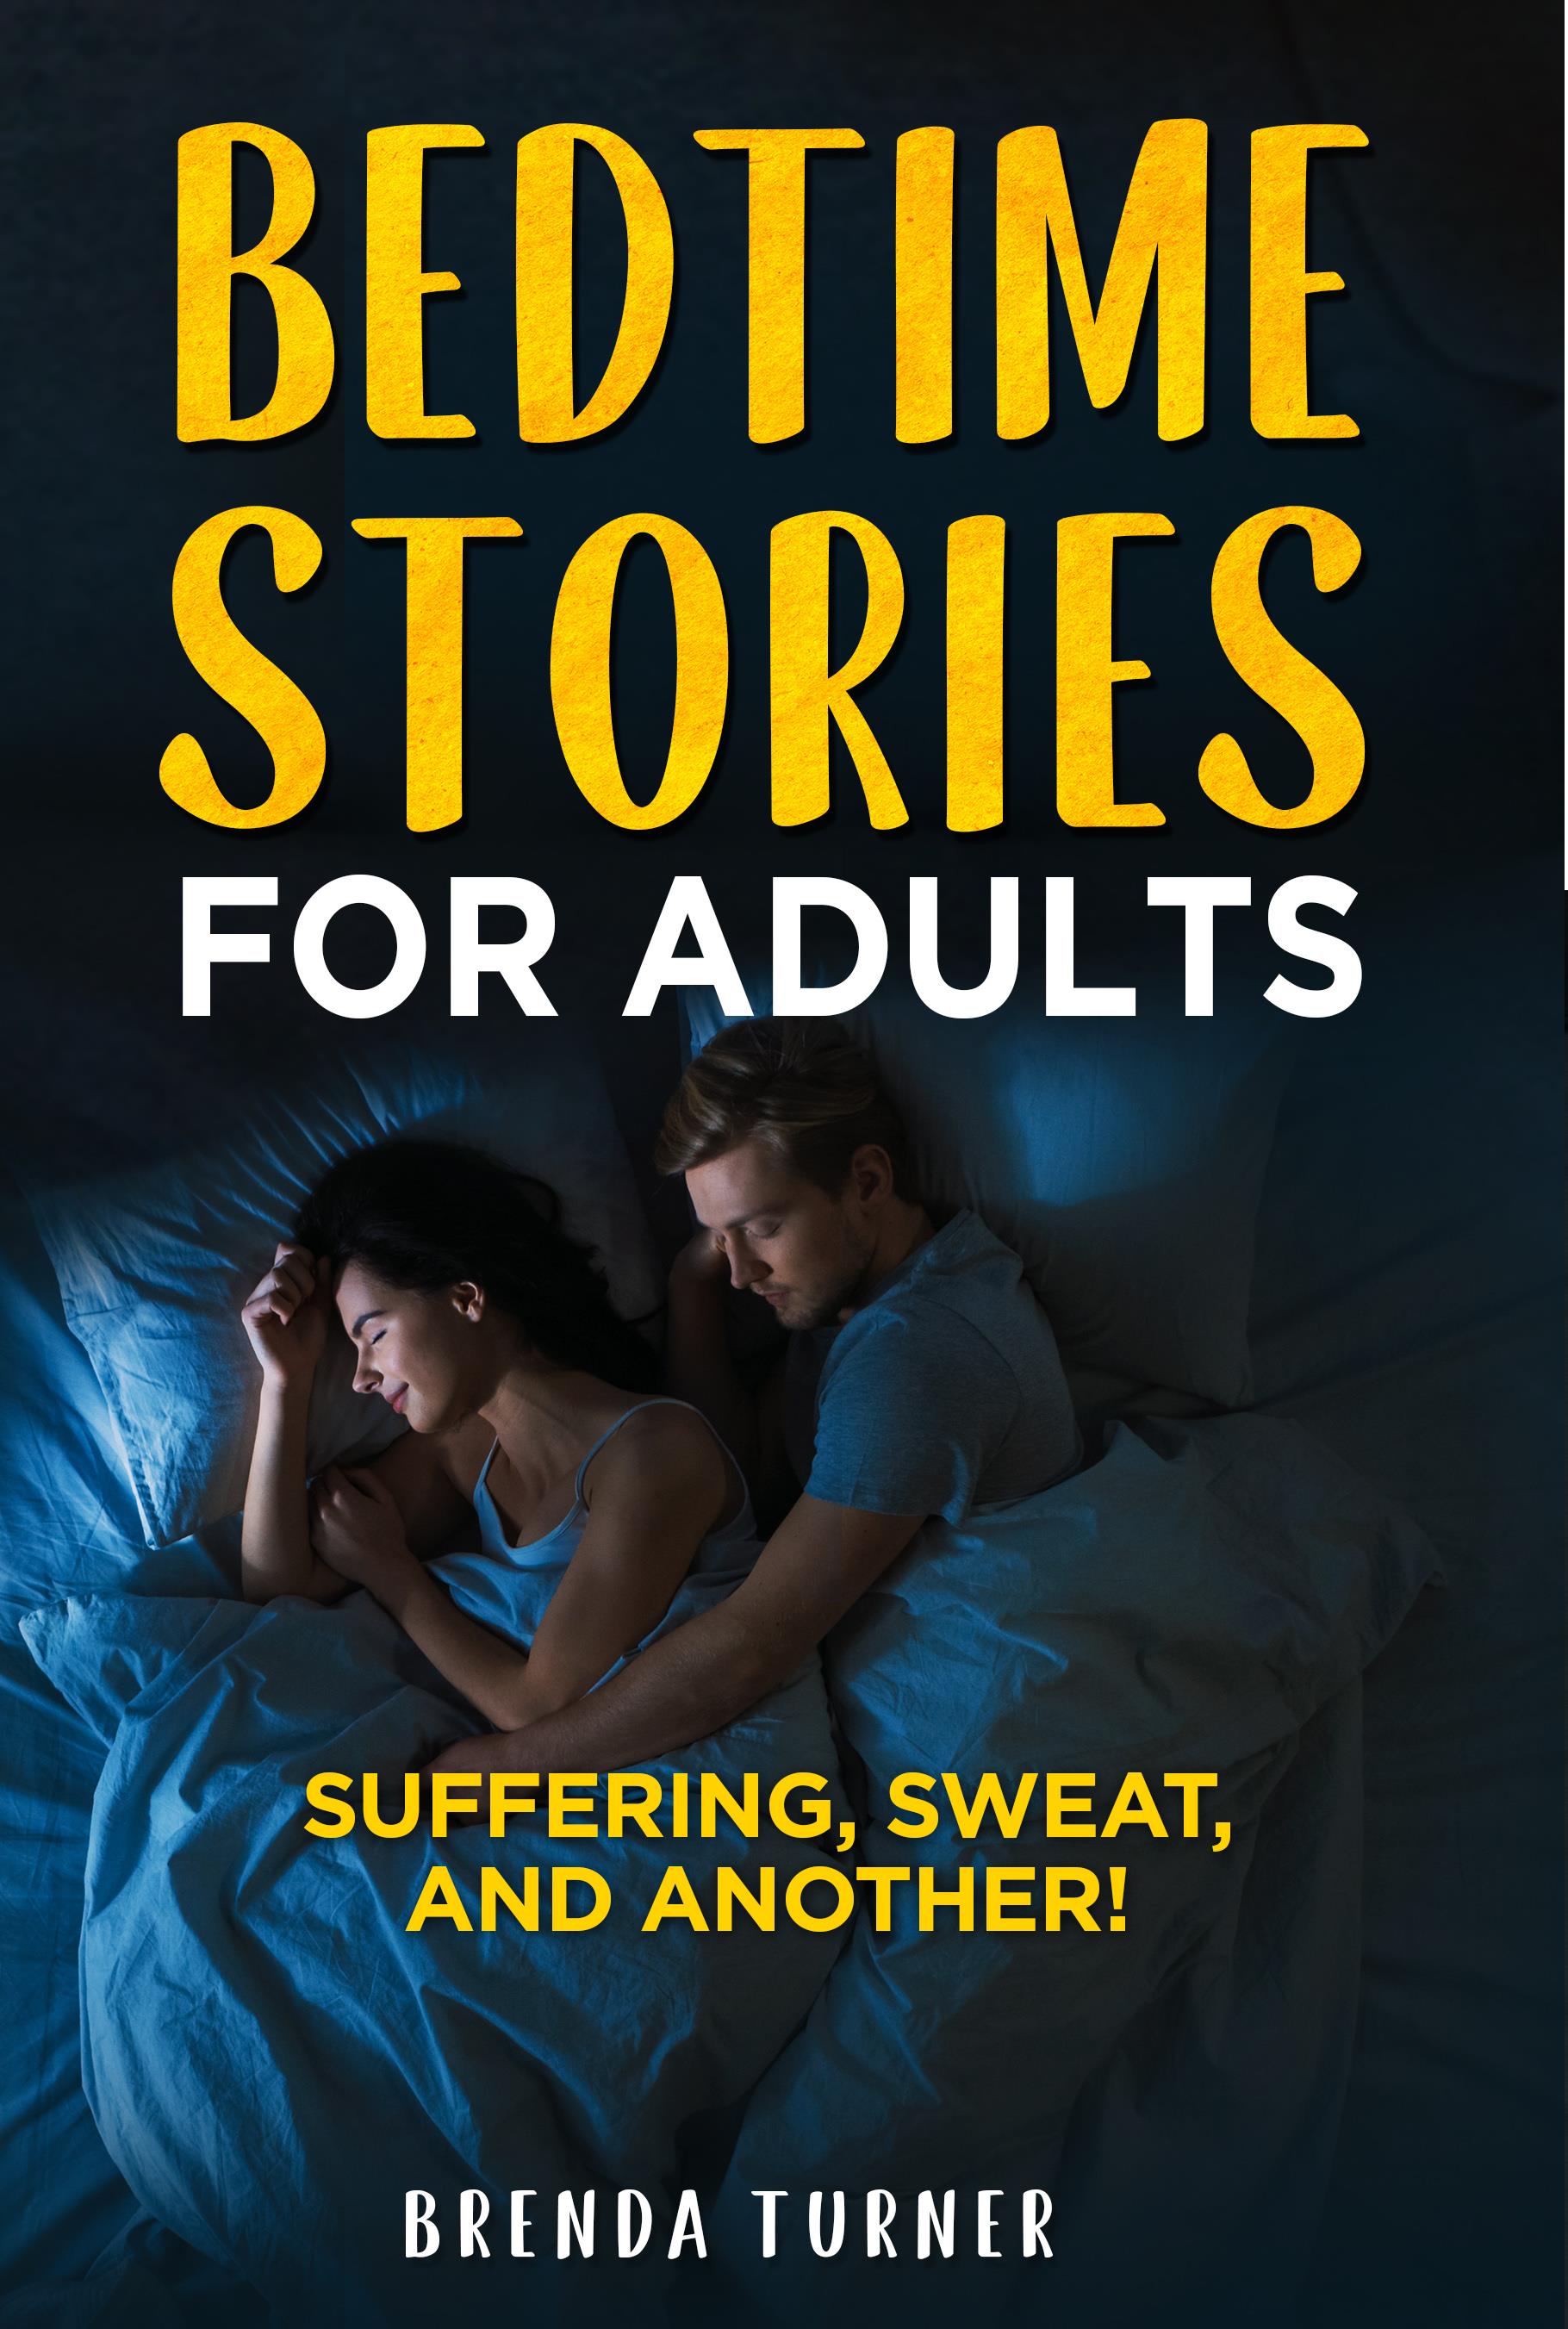 Bedtime stories for adults. Suffering, Sweat, and another!